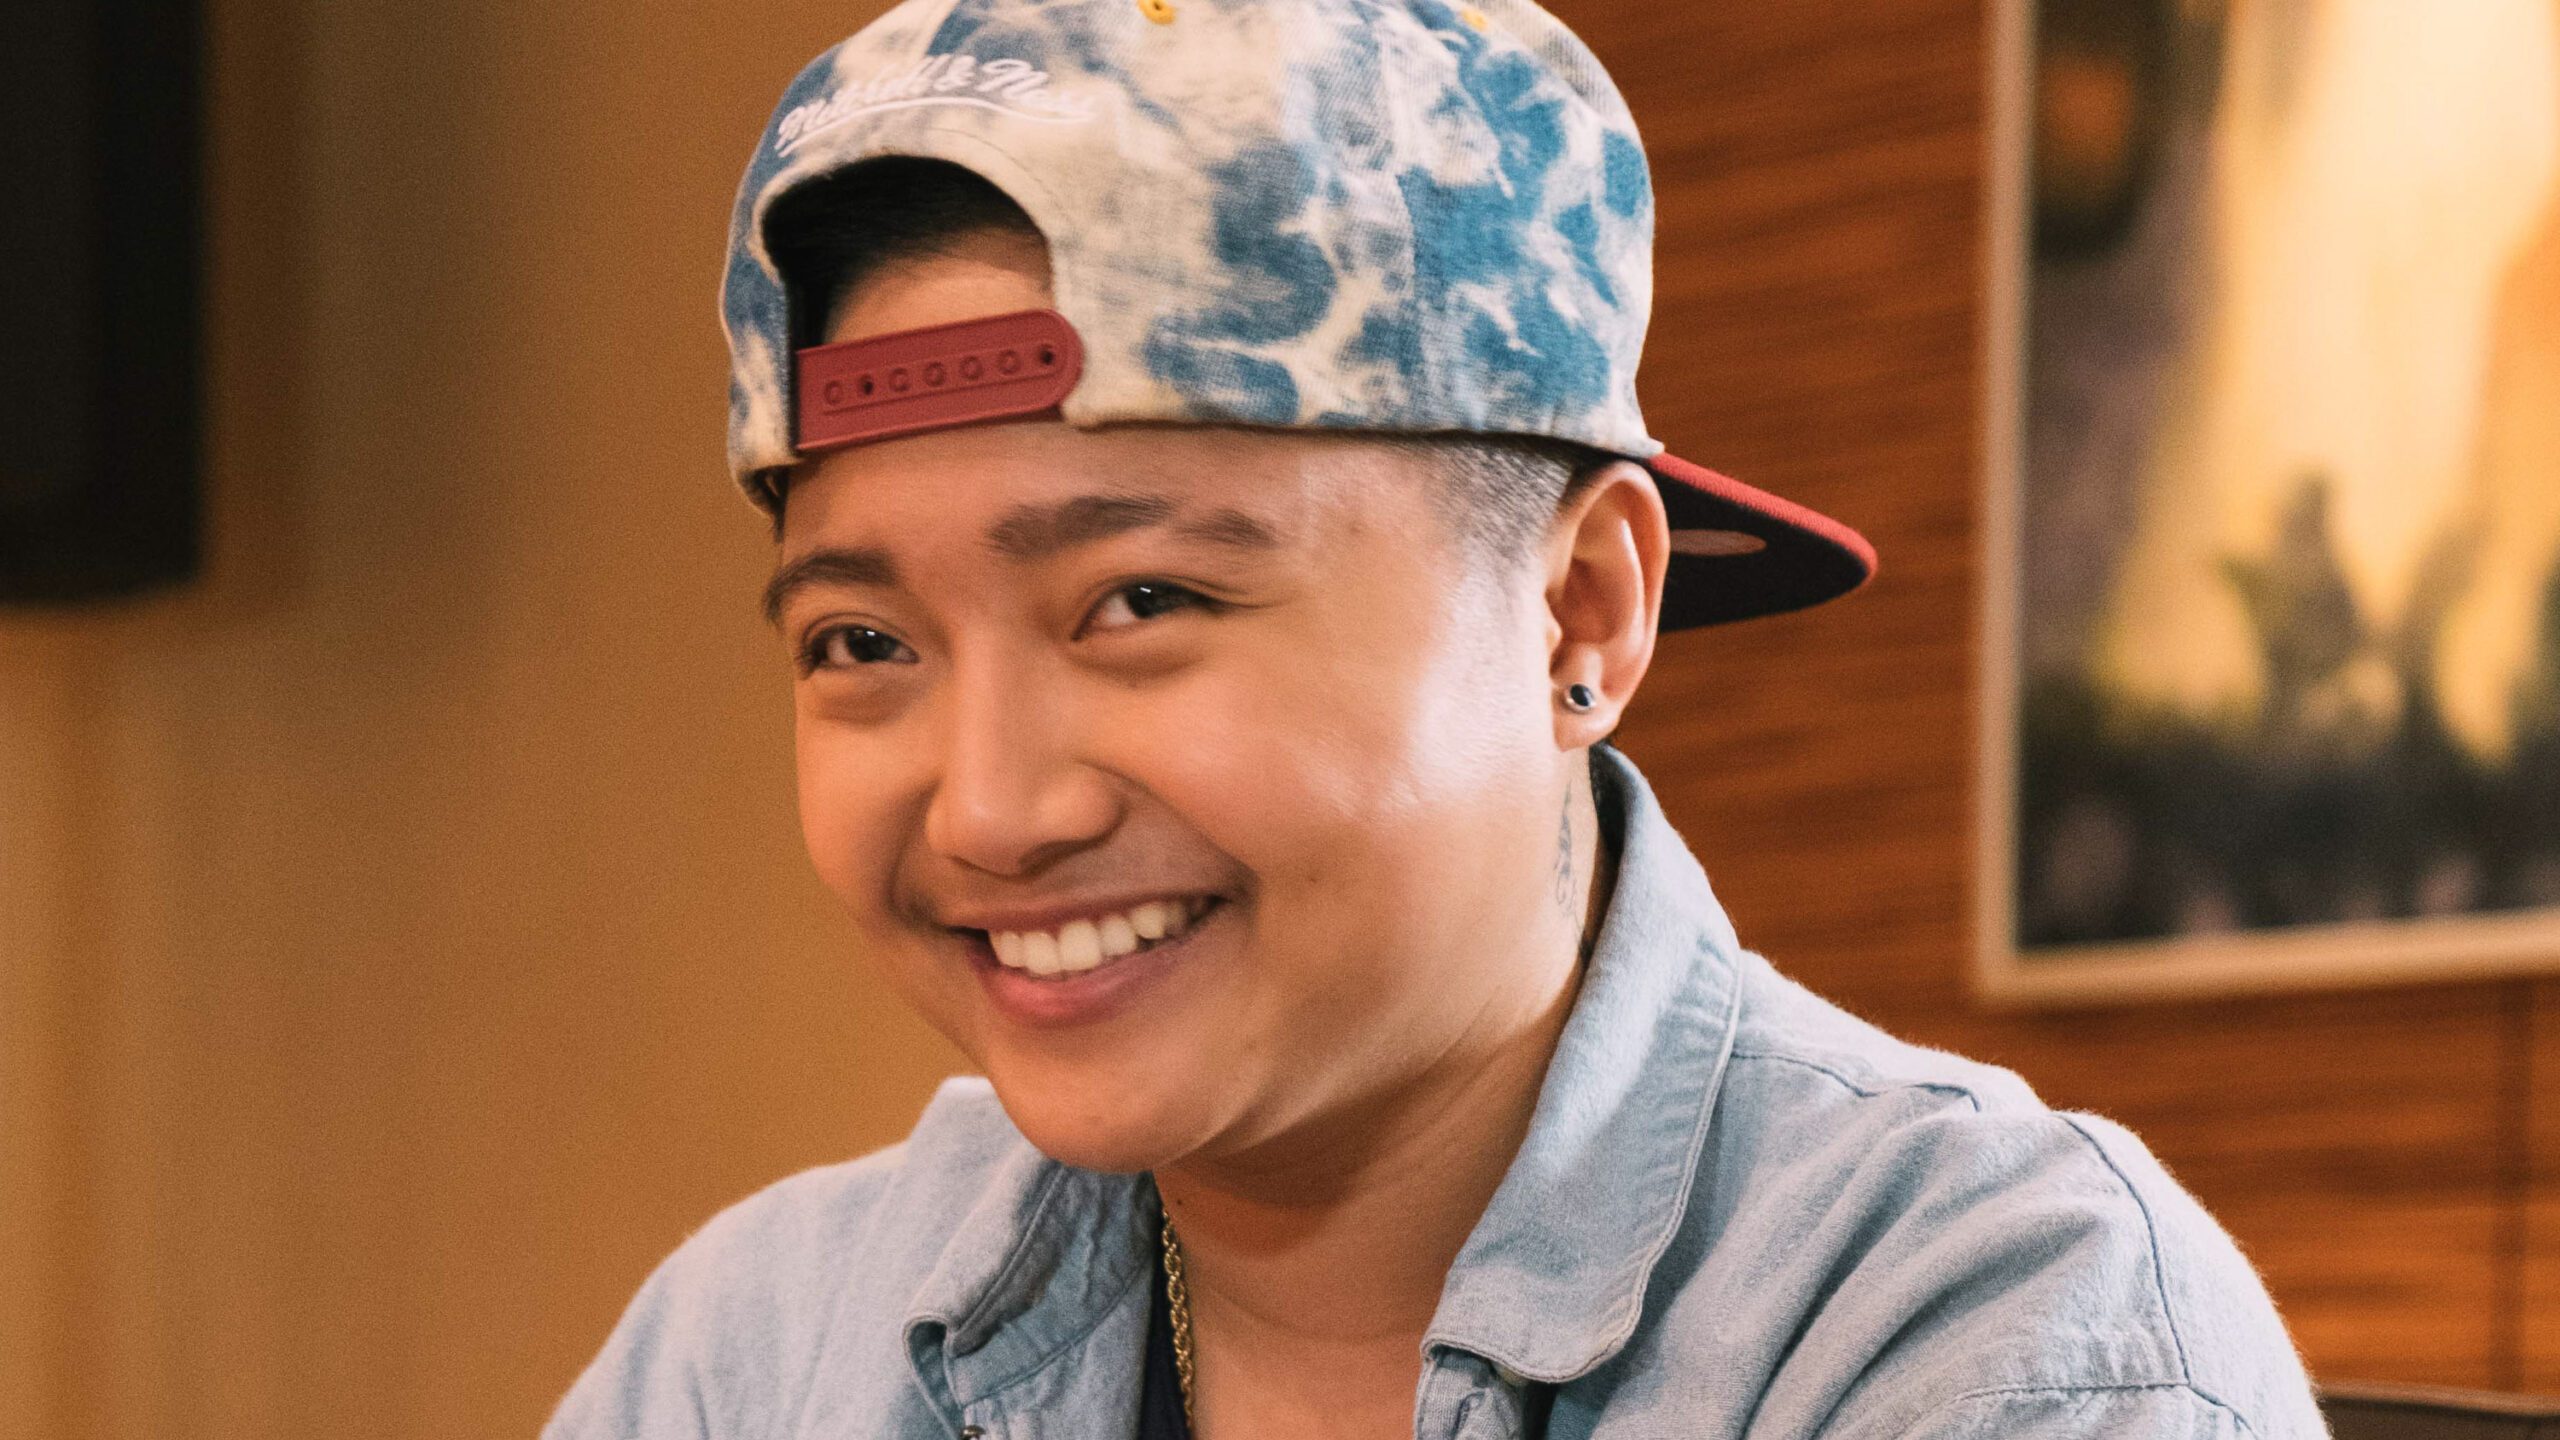 Jake Zyrus is performing at NYC Pride March 2021